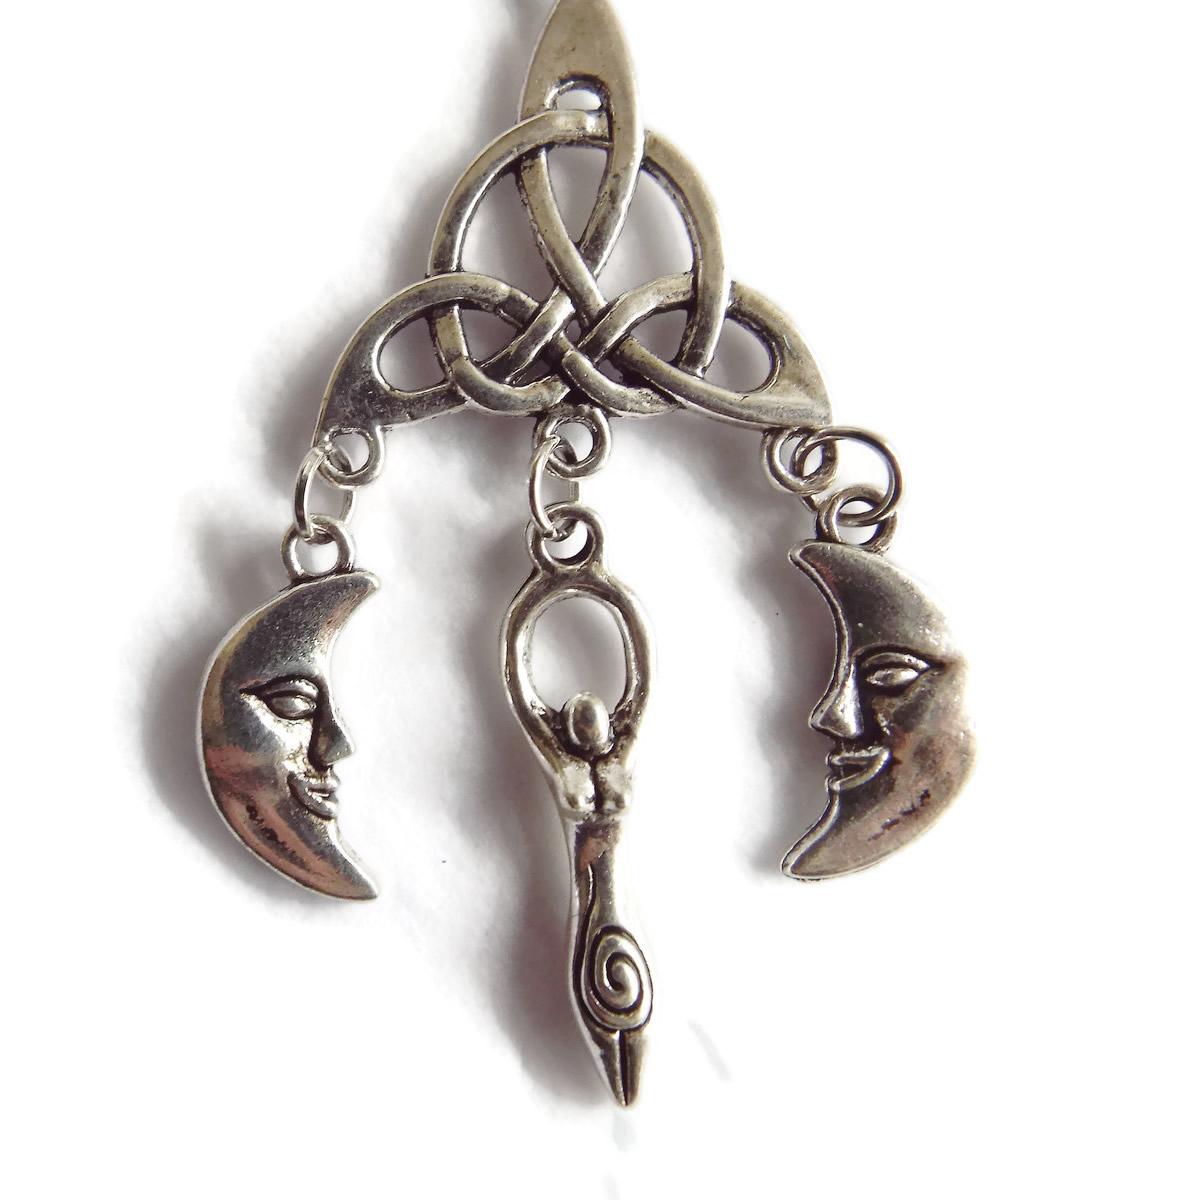 Goddess, Triquetra and Crescent Moons Pendant Charm Necklace